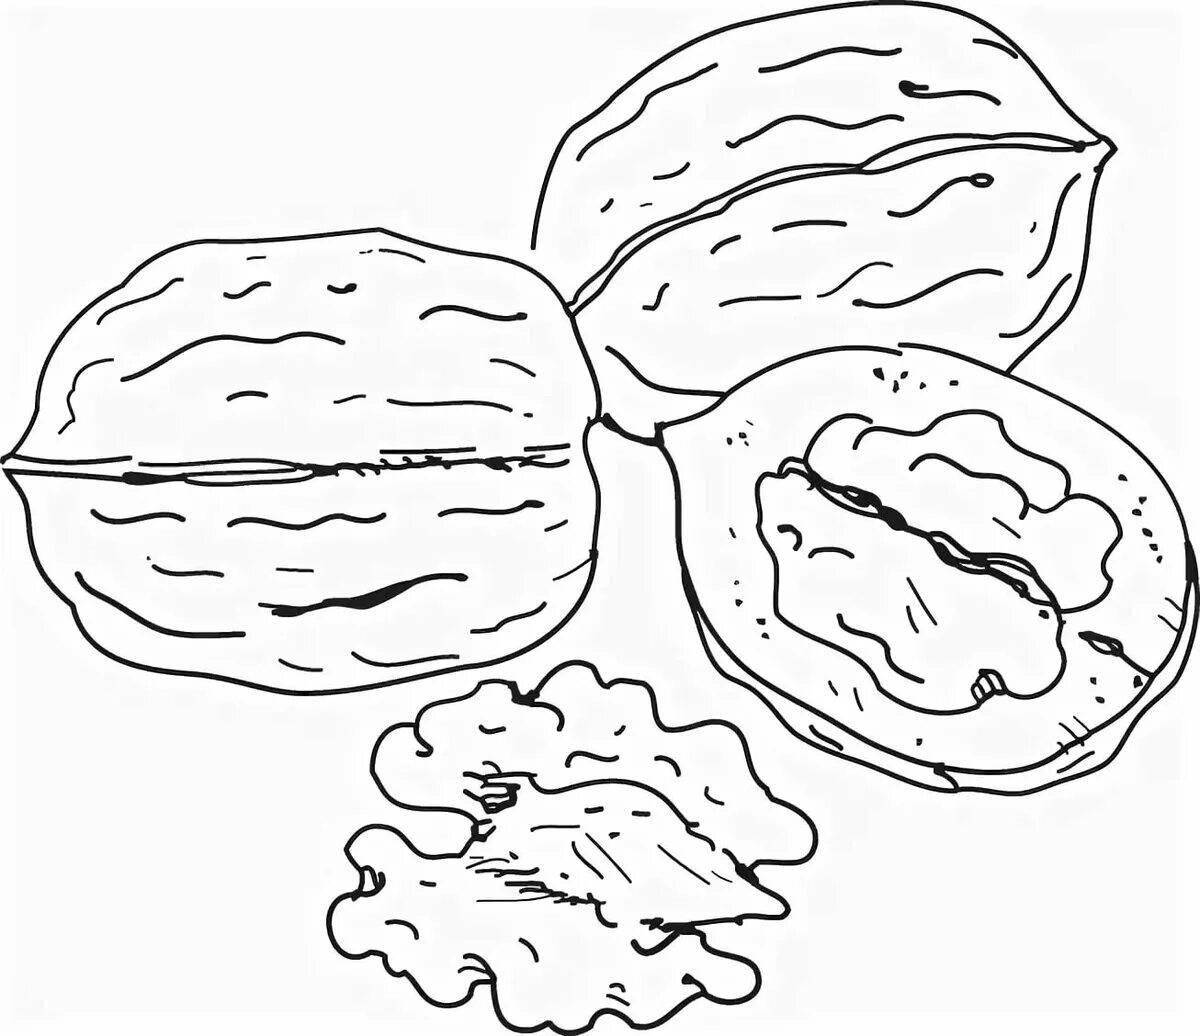 Bright walnut coloring page